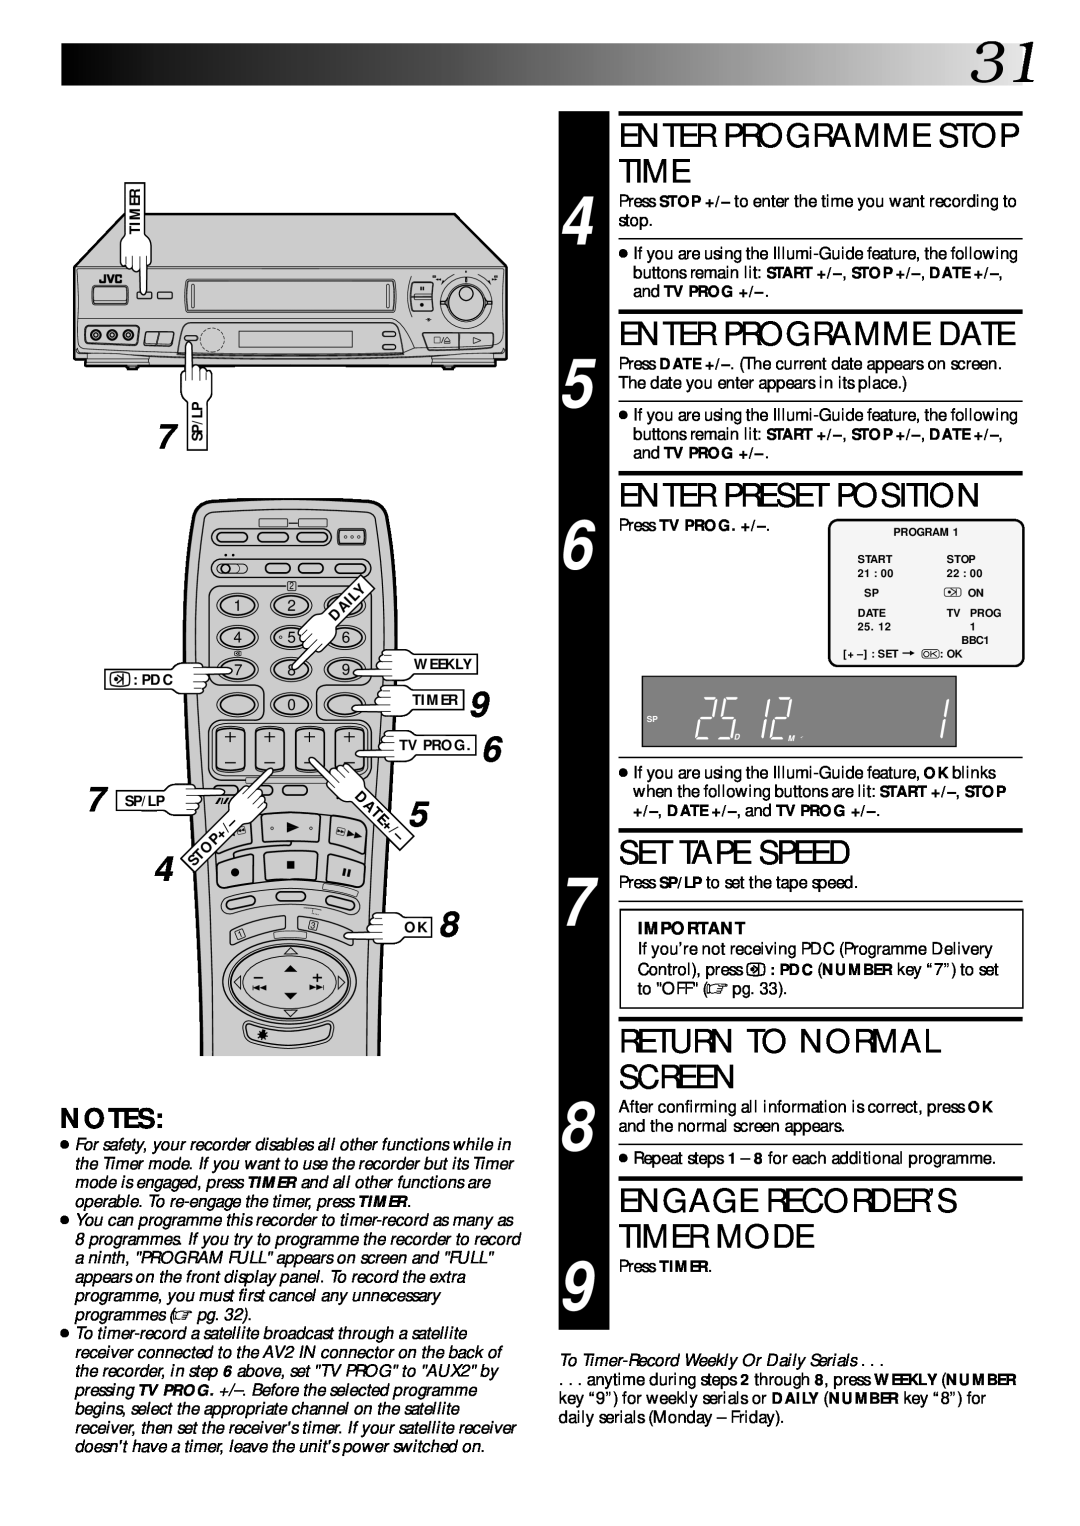 JVC PU30425 Enter Programme Stop Time, Engage Recorder’S Timer Mode, Enter Programme Date, Date+, Set Tape Speed, Screen 